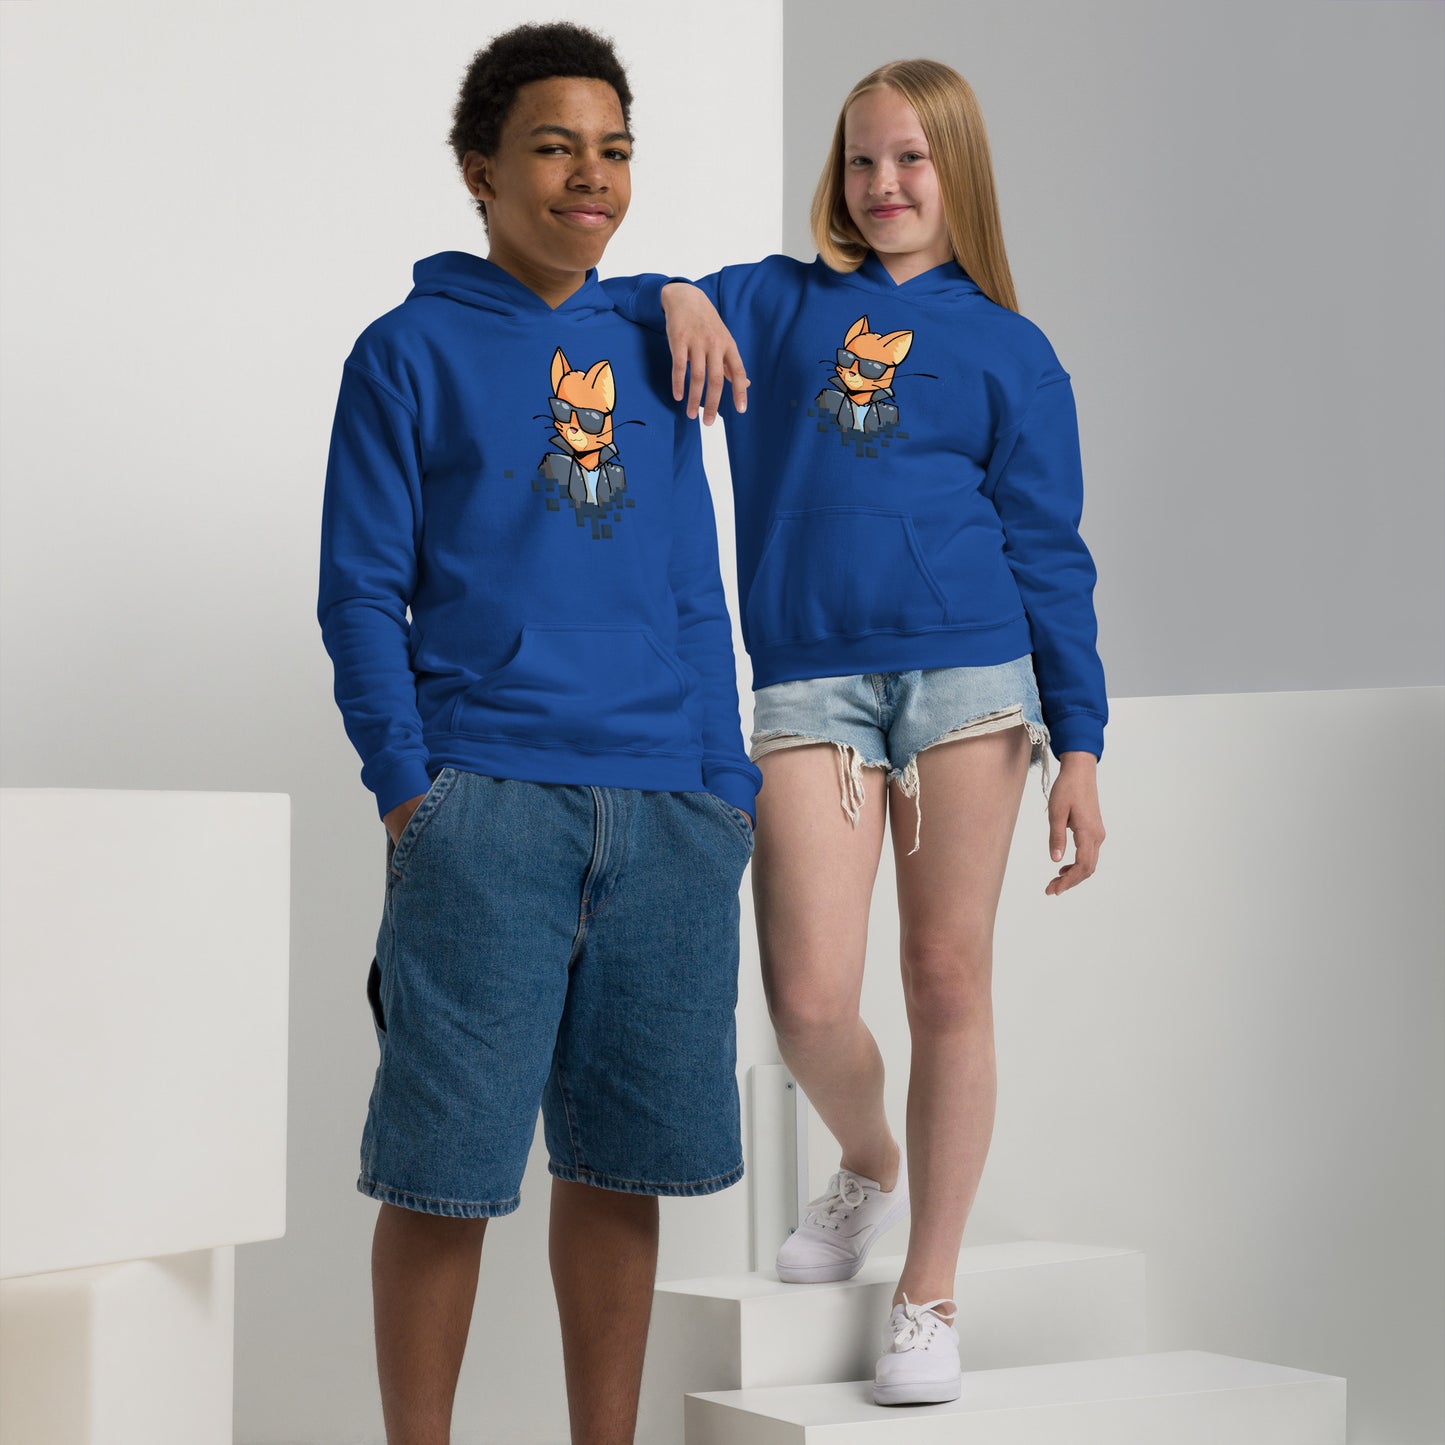 Youth (girl and boy) with royal blue hoodie with cool cat